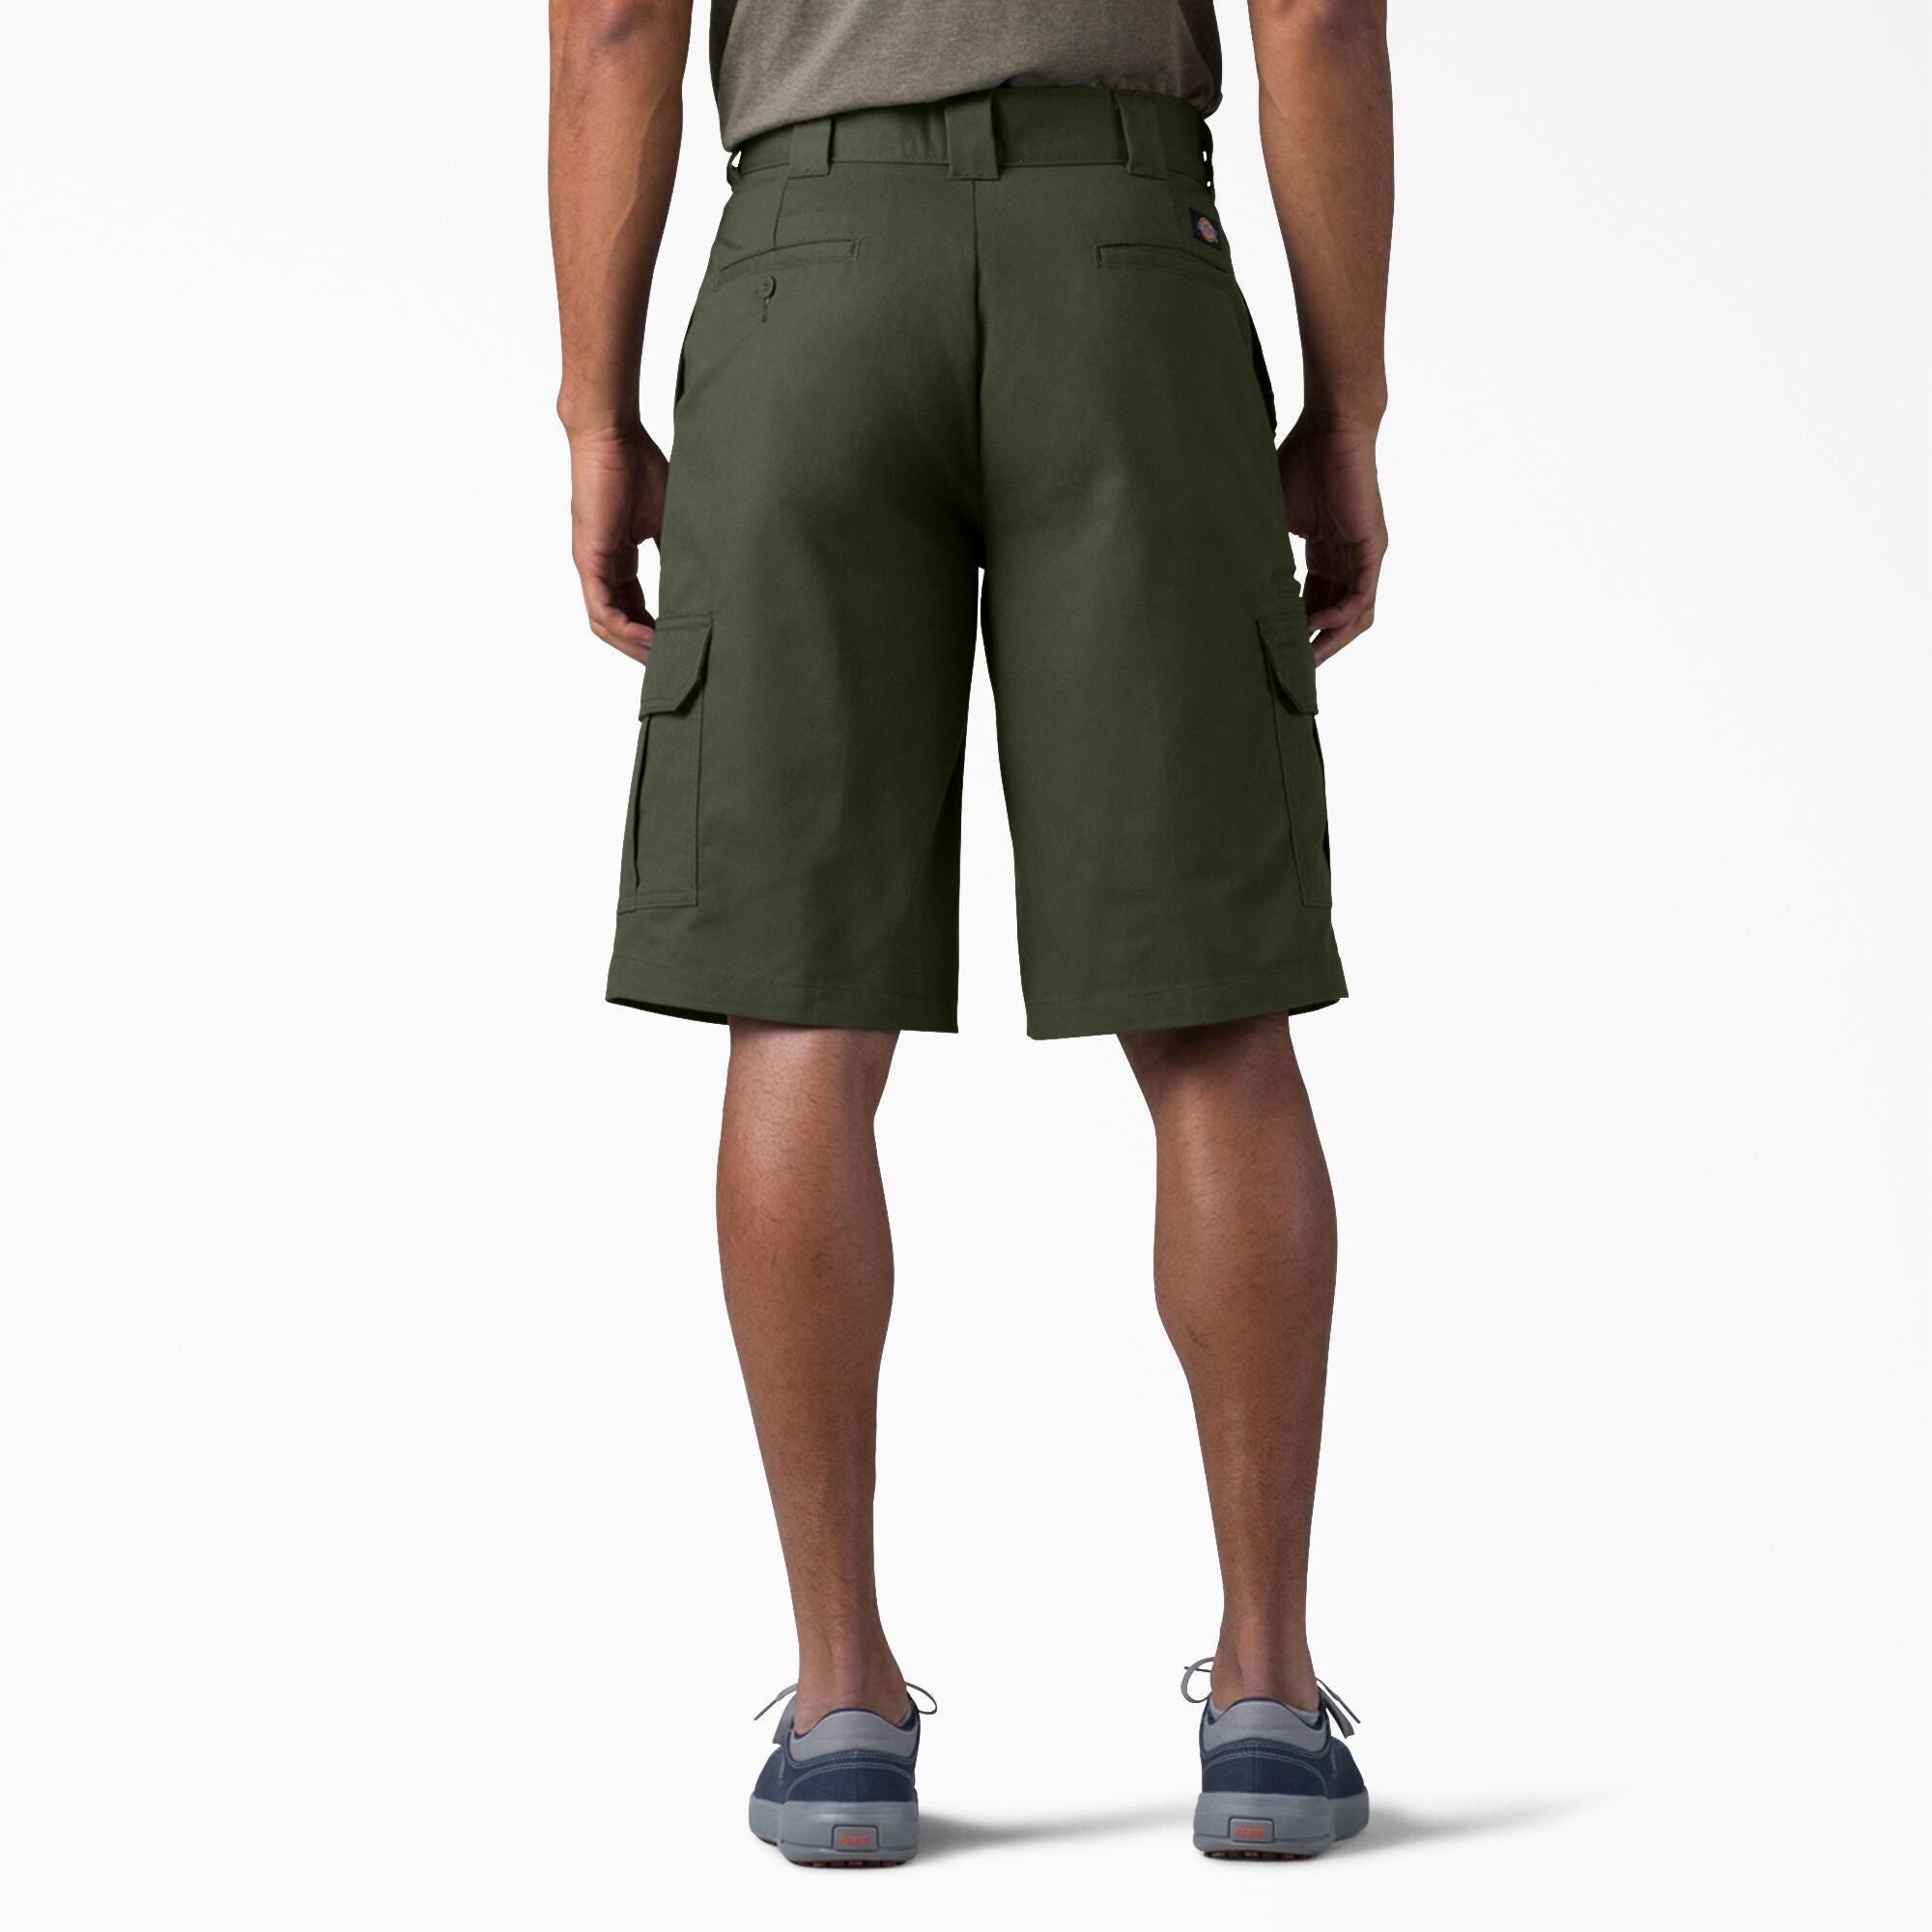 Dickies Relaxed Fit Cargo Shorts, 13", Olive Green